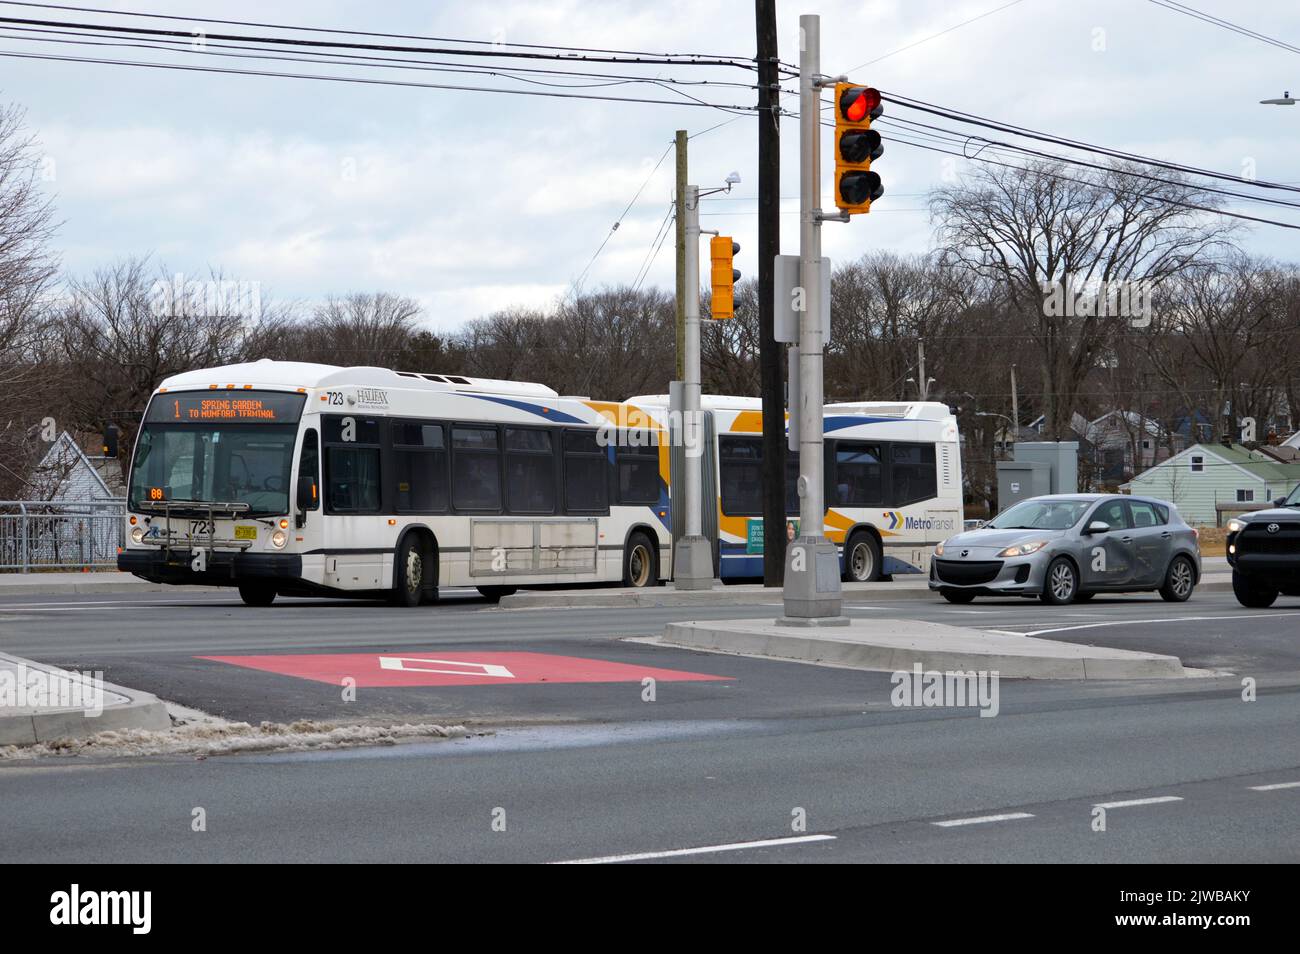 A Halifax Transit articulated bus using a queue jump lane, a type of transit priority measure, on Bayers Road in Halifax, Nova Scotia Stock Photo